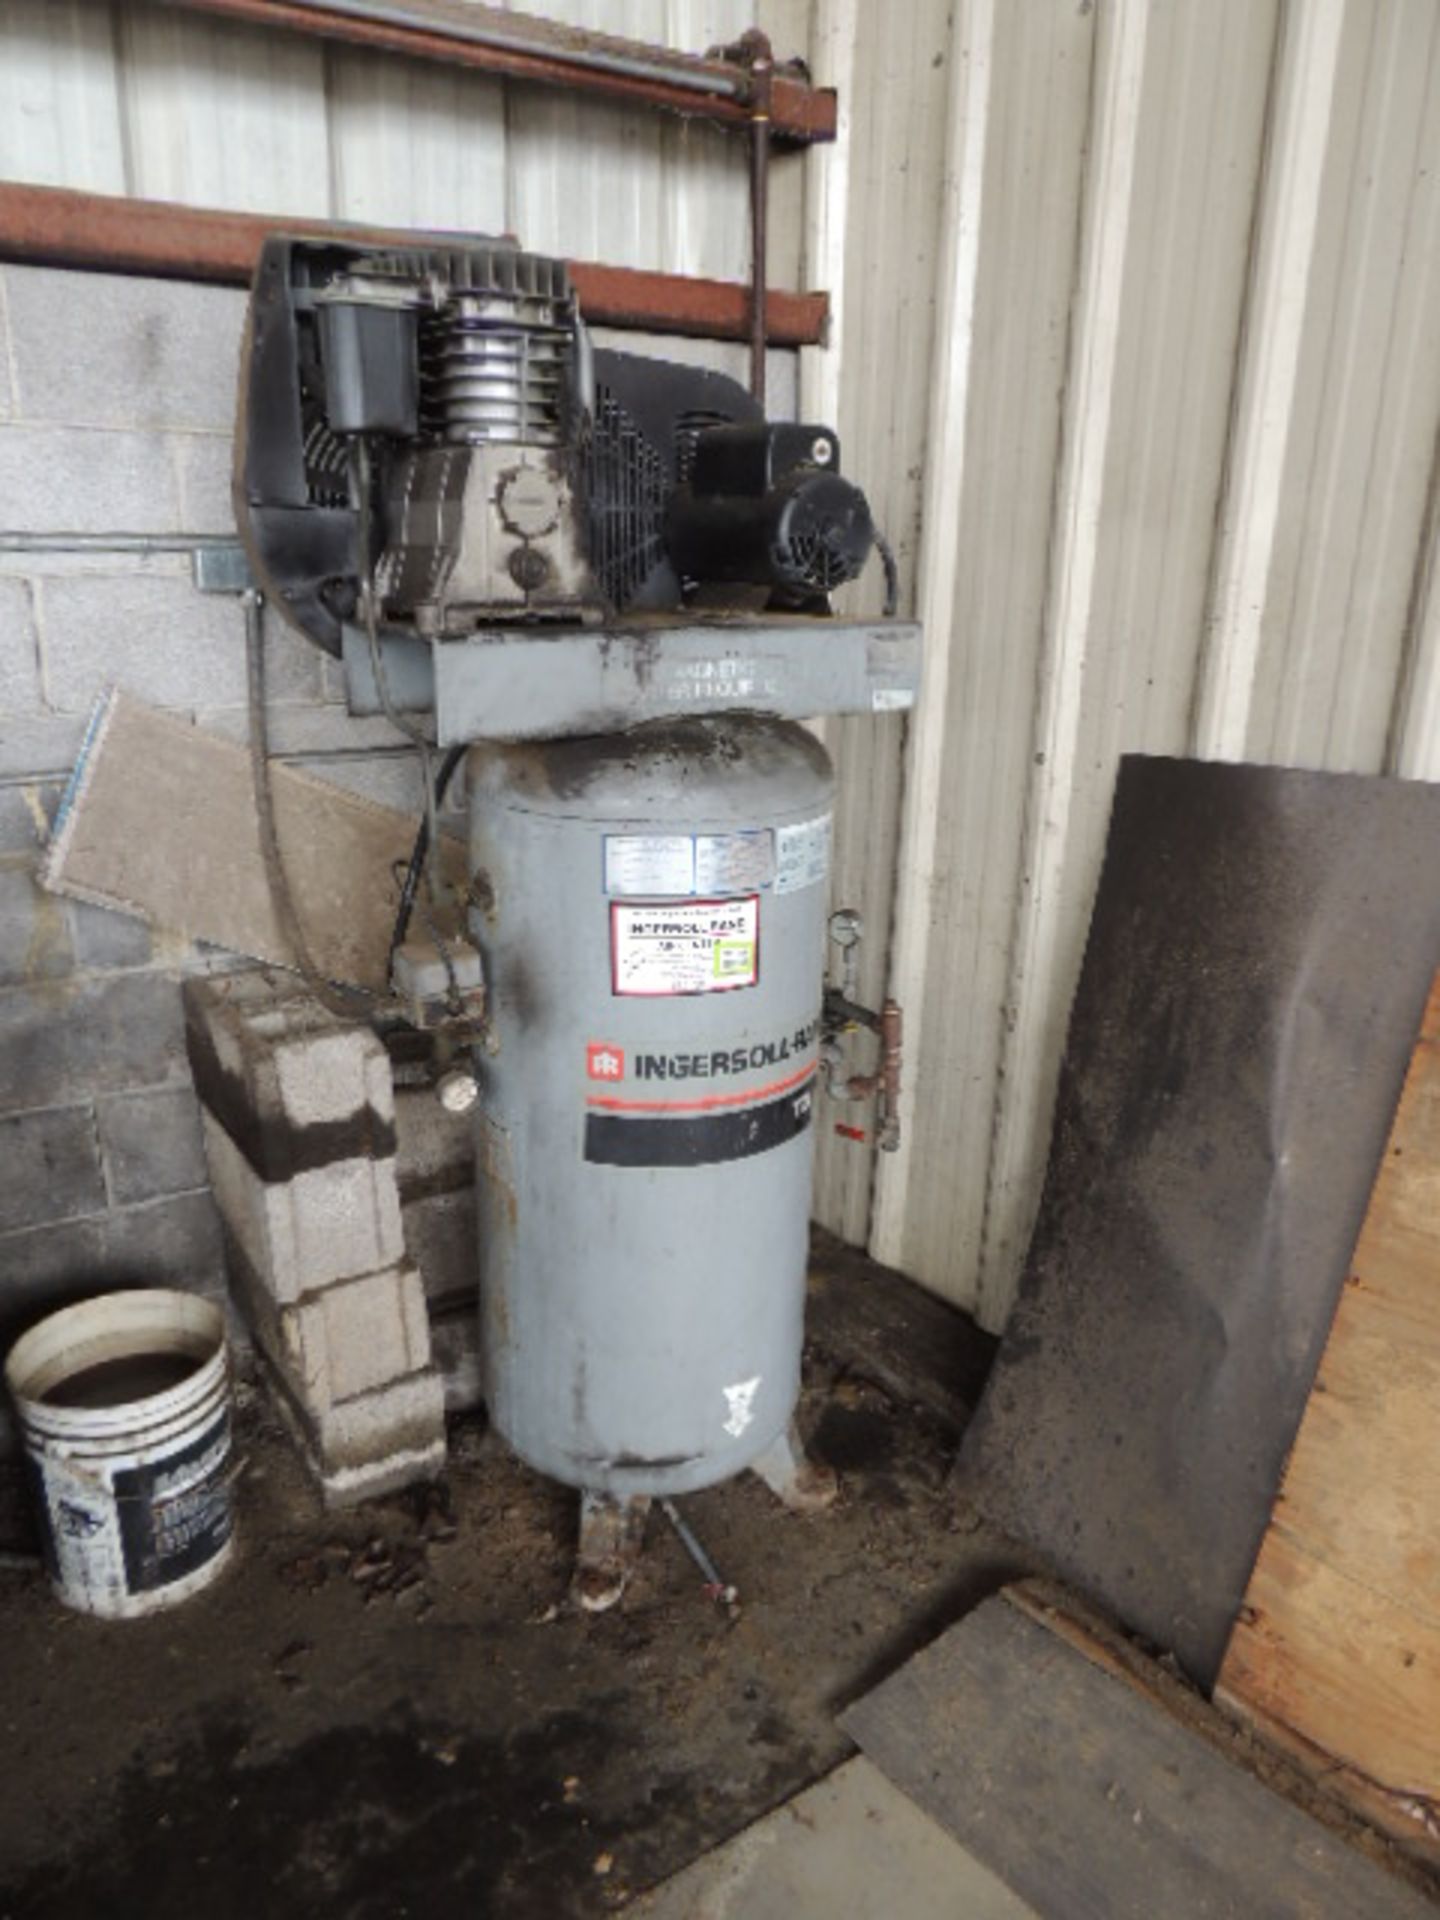 Ingersoll Rand T21 50 gal tank, 120 psi, 230v. HIT# 2191828. Outside Shop. Asset Located at 100